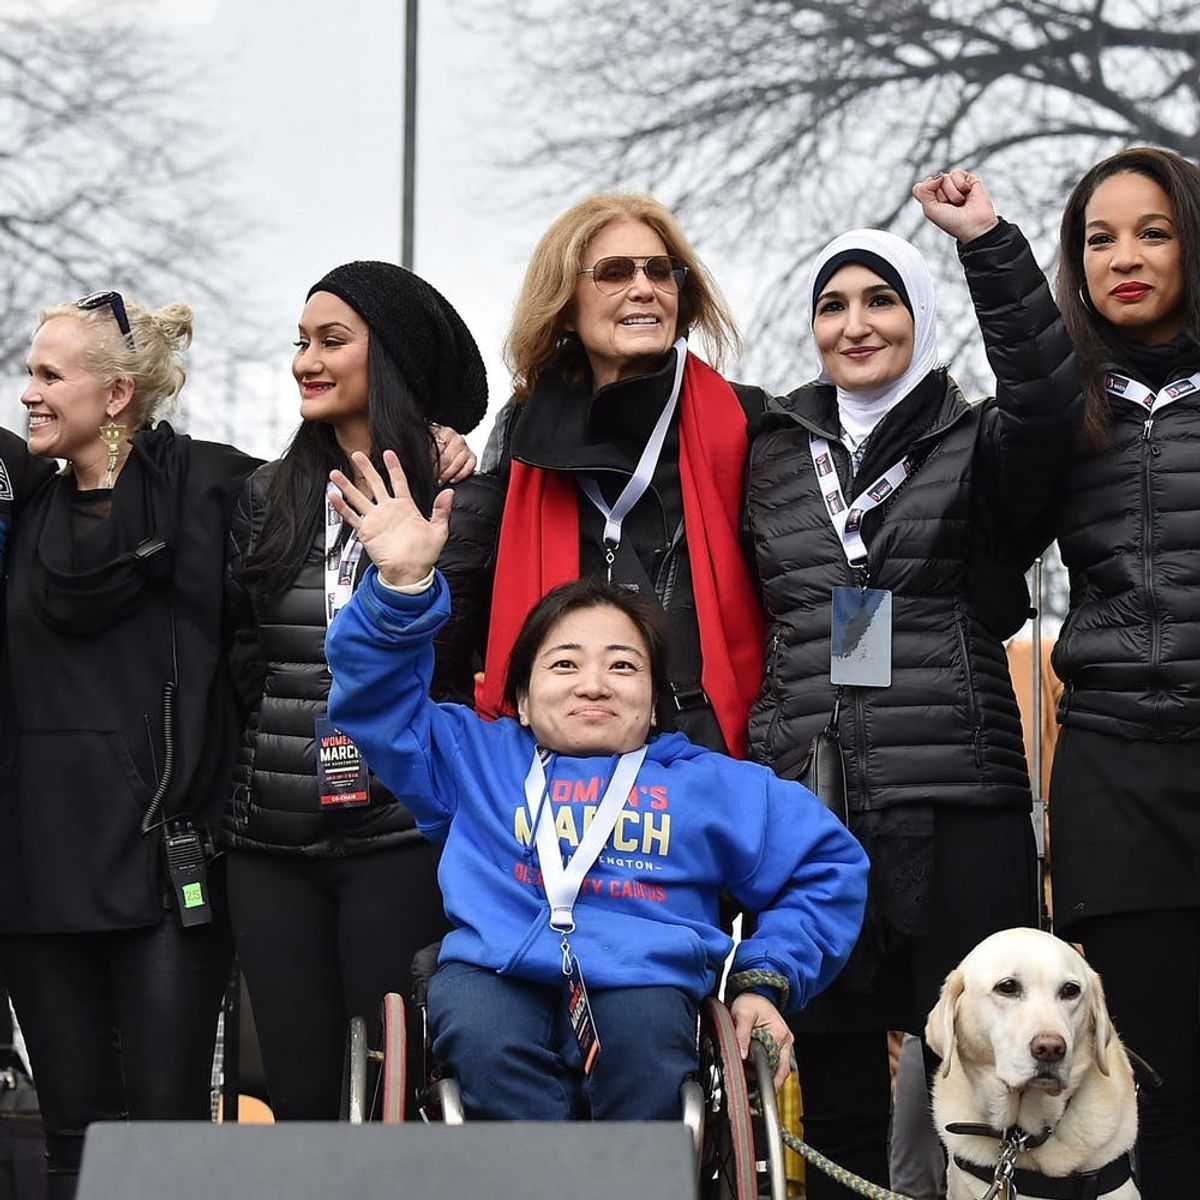 Meet 14 of the Badass Babes You Have to Thank for Yesterday’s Marches